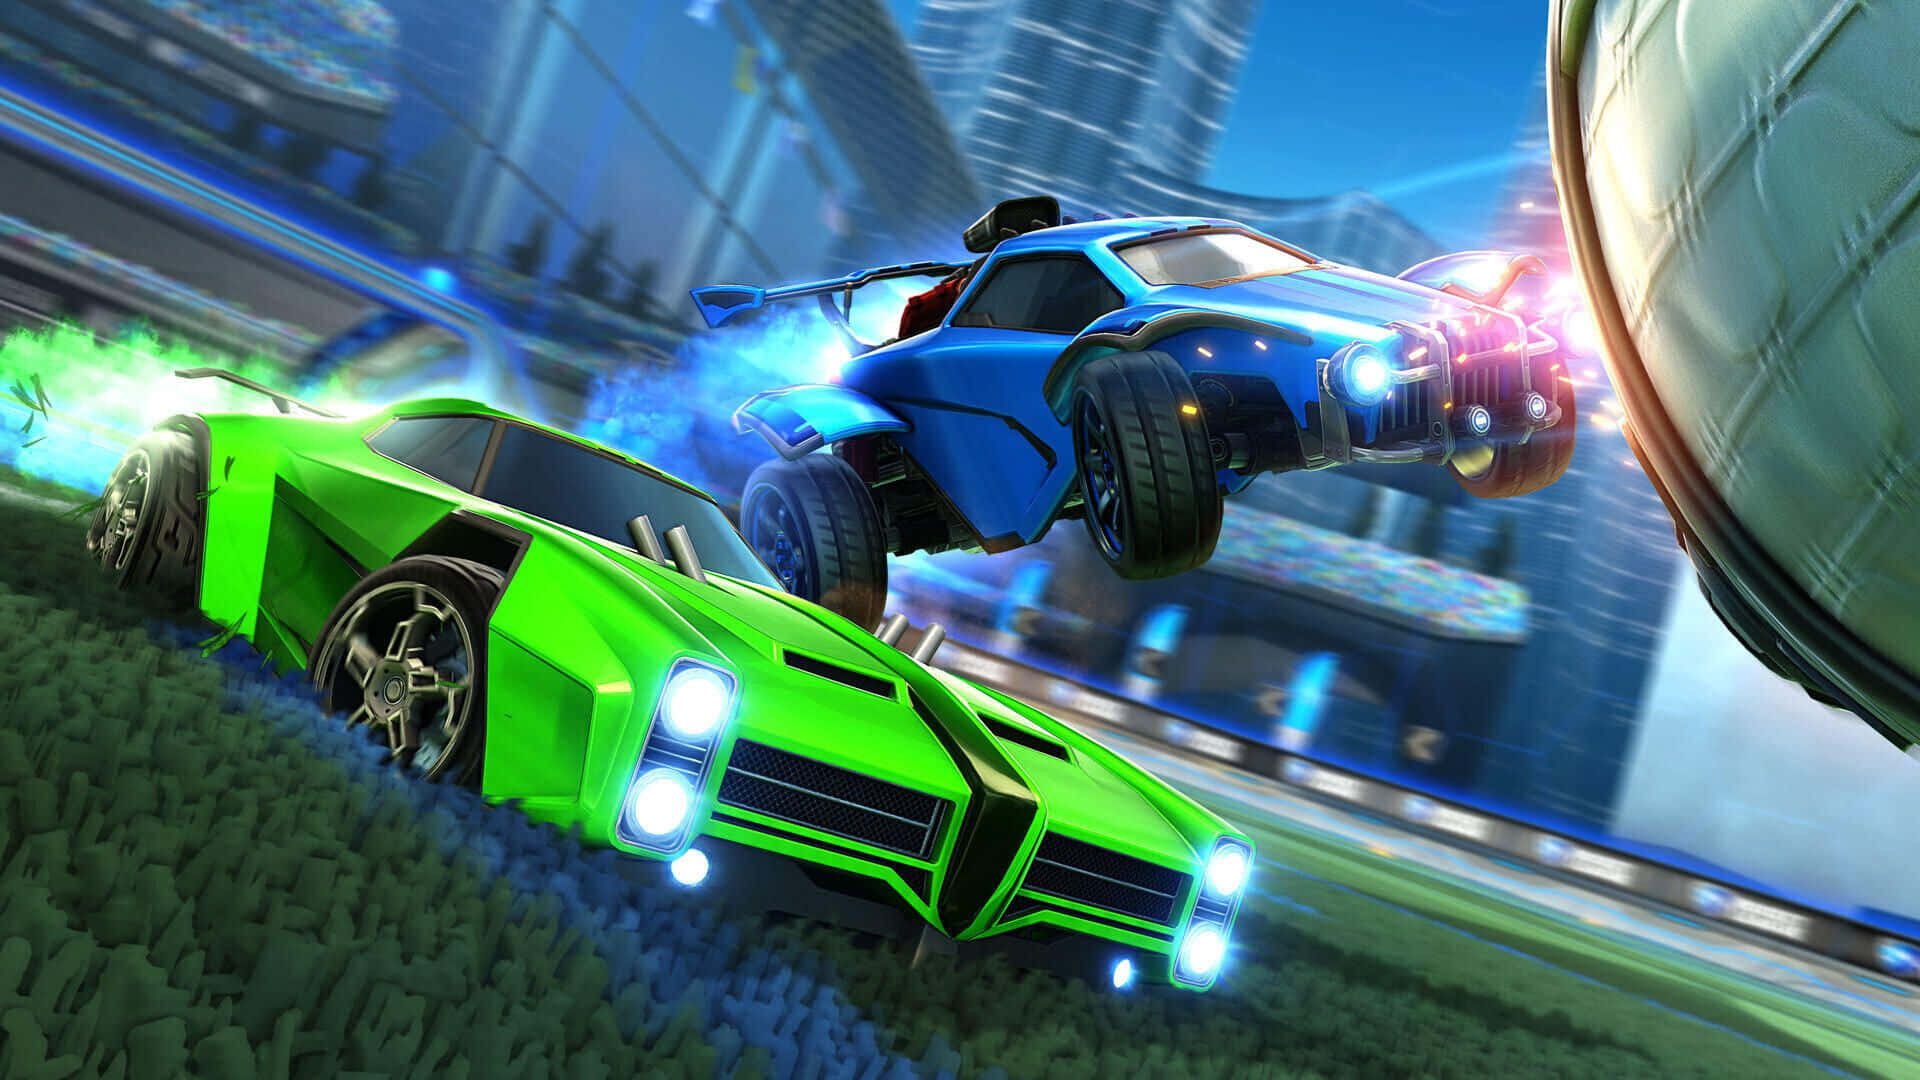 Rocket League: How to play the high-octane football game